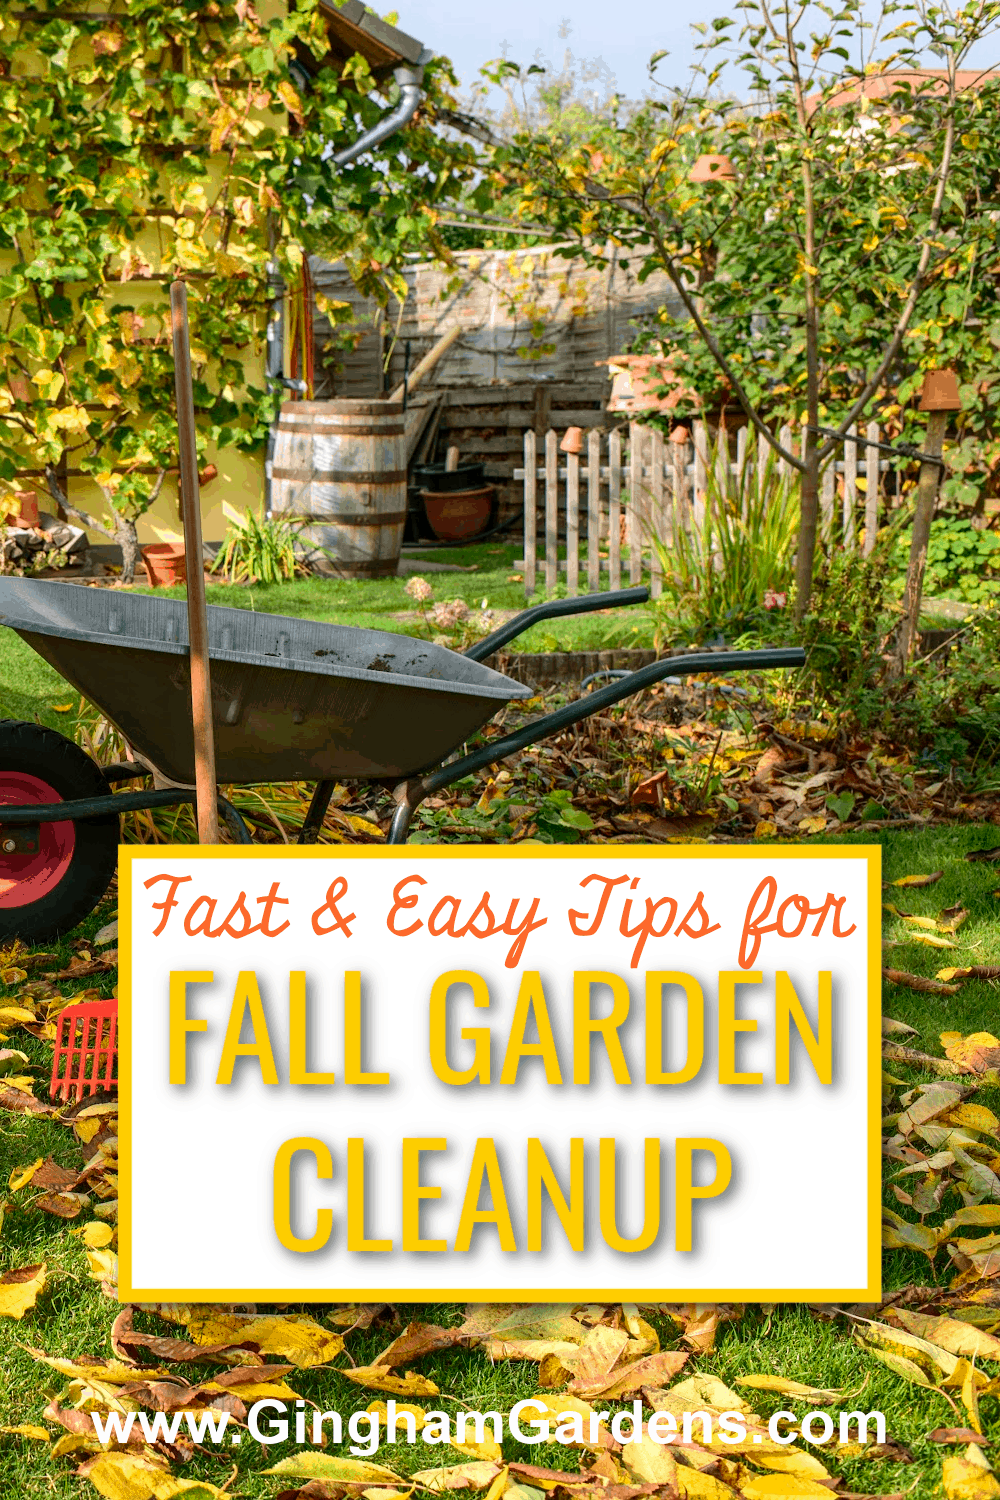 Image of a fall garden with text overlay - Fast & Easy Tips for Fall Garden Cleanup